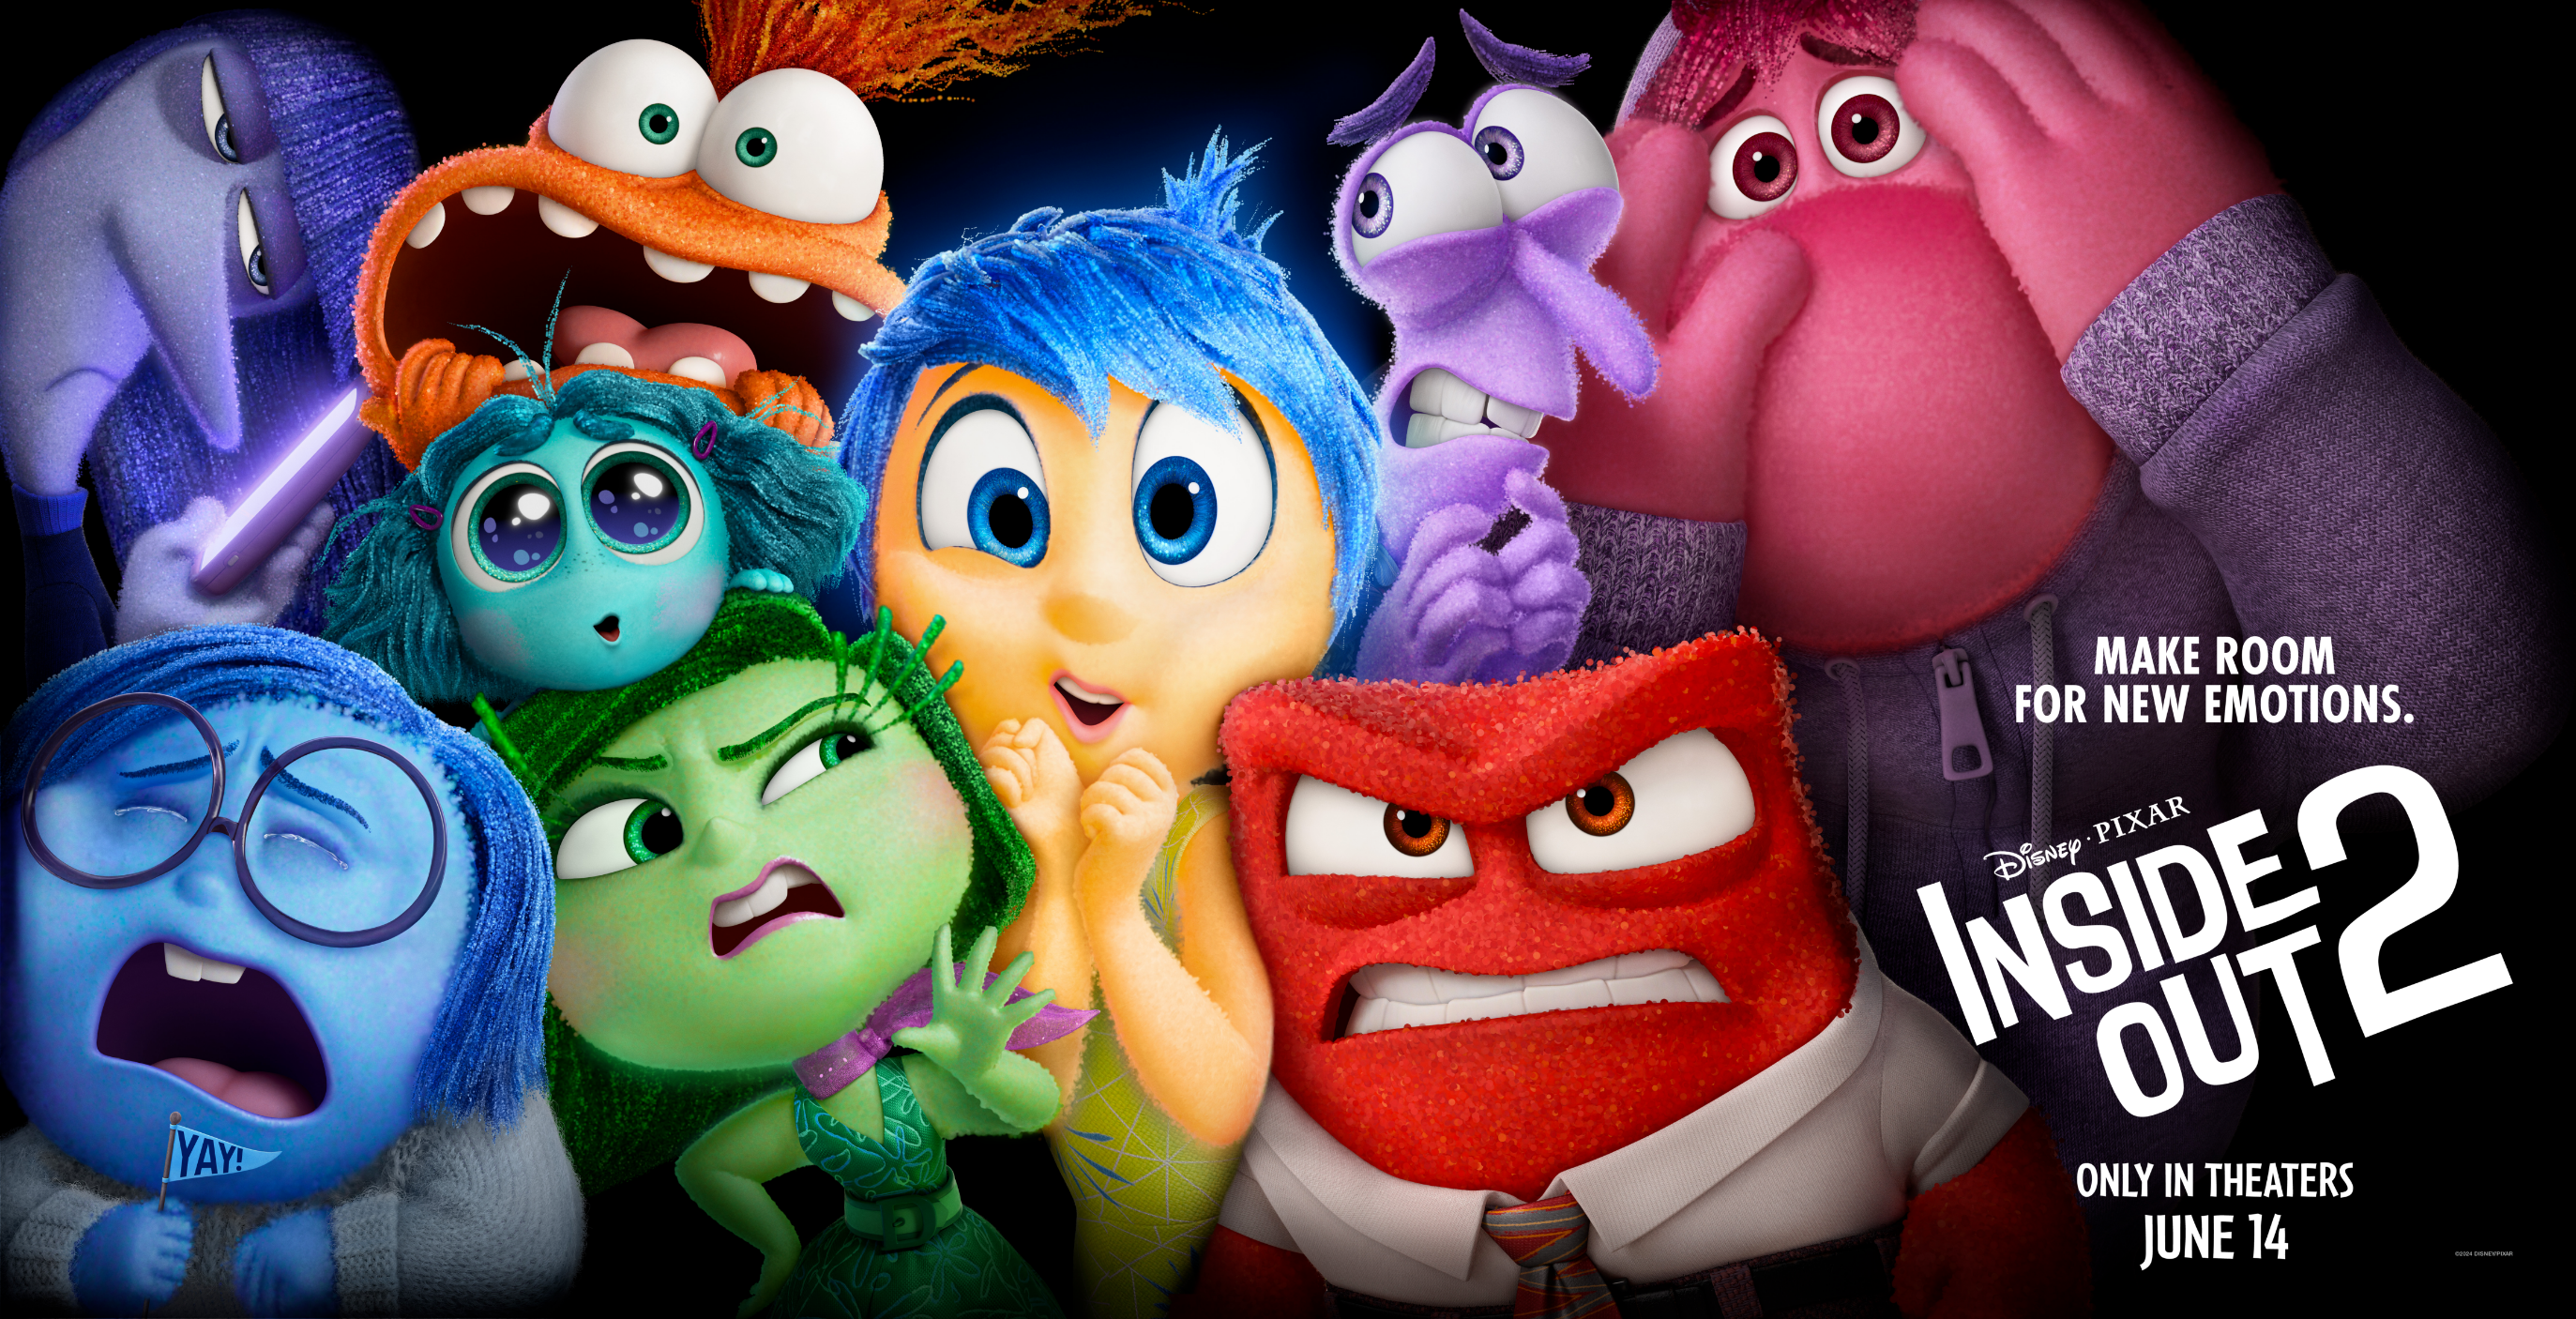 Celebrate Summer with Mangos and Win a Trip to the Inside Out 2 World Premiere!